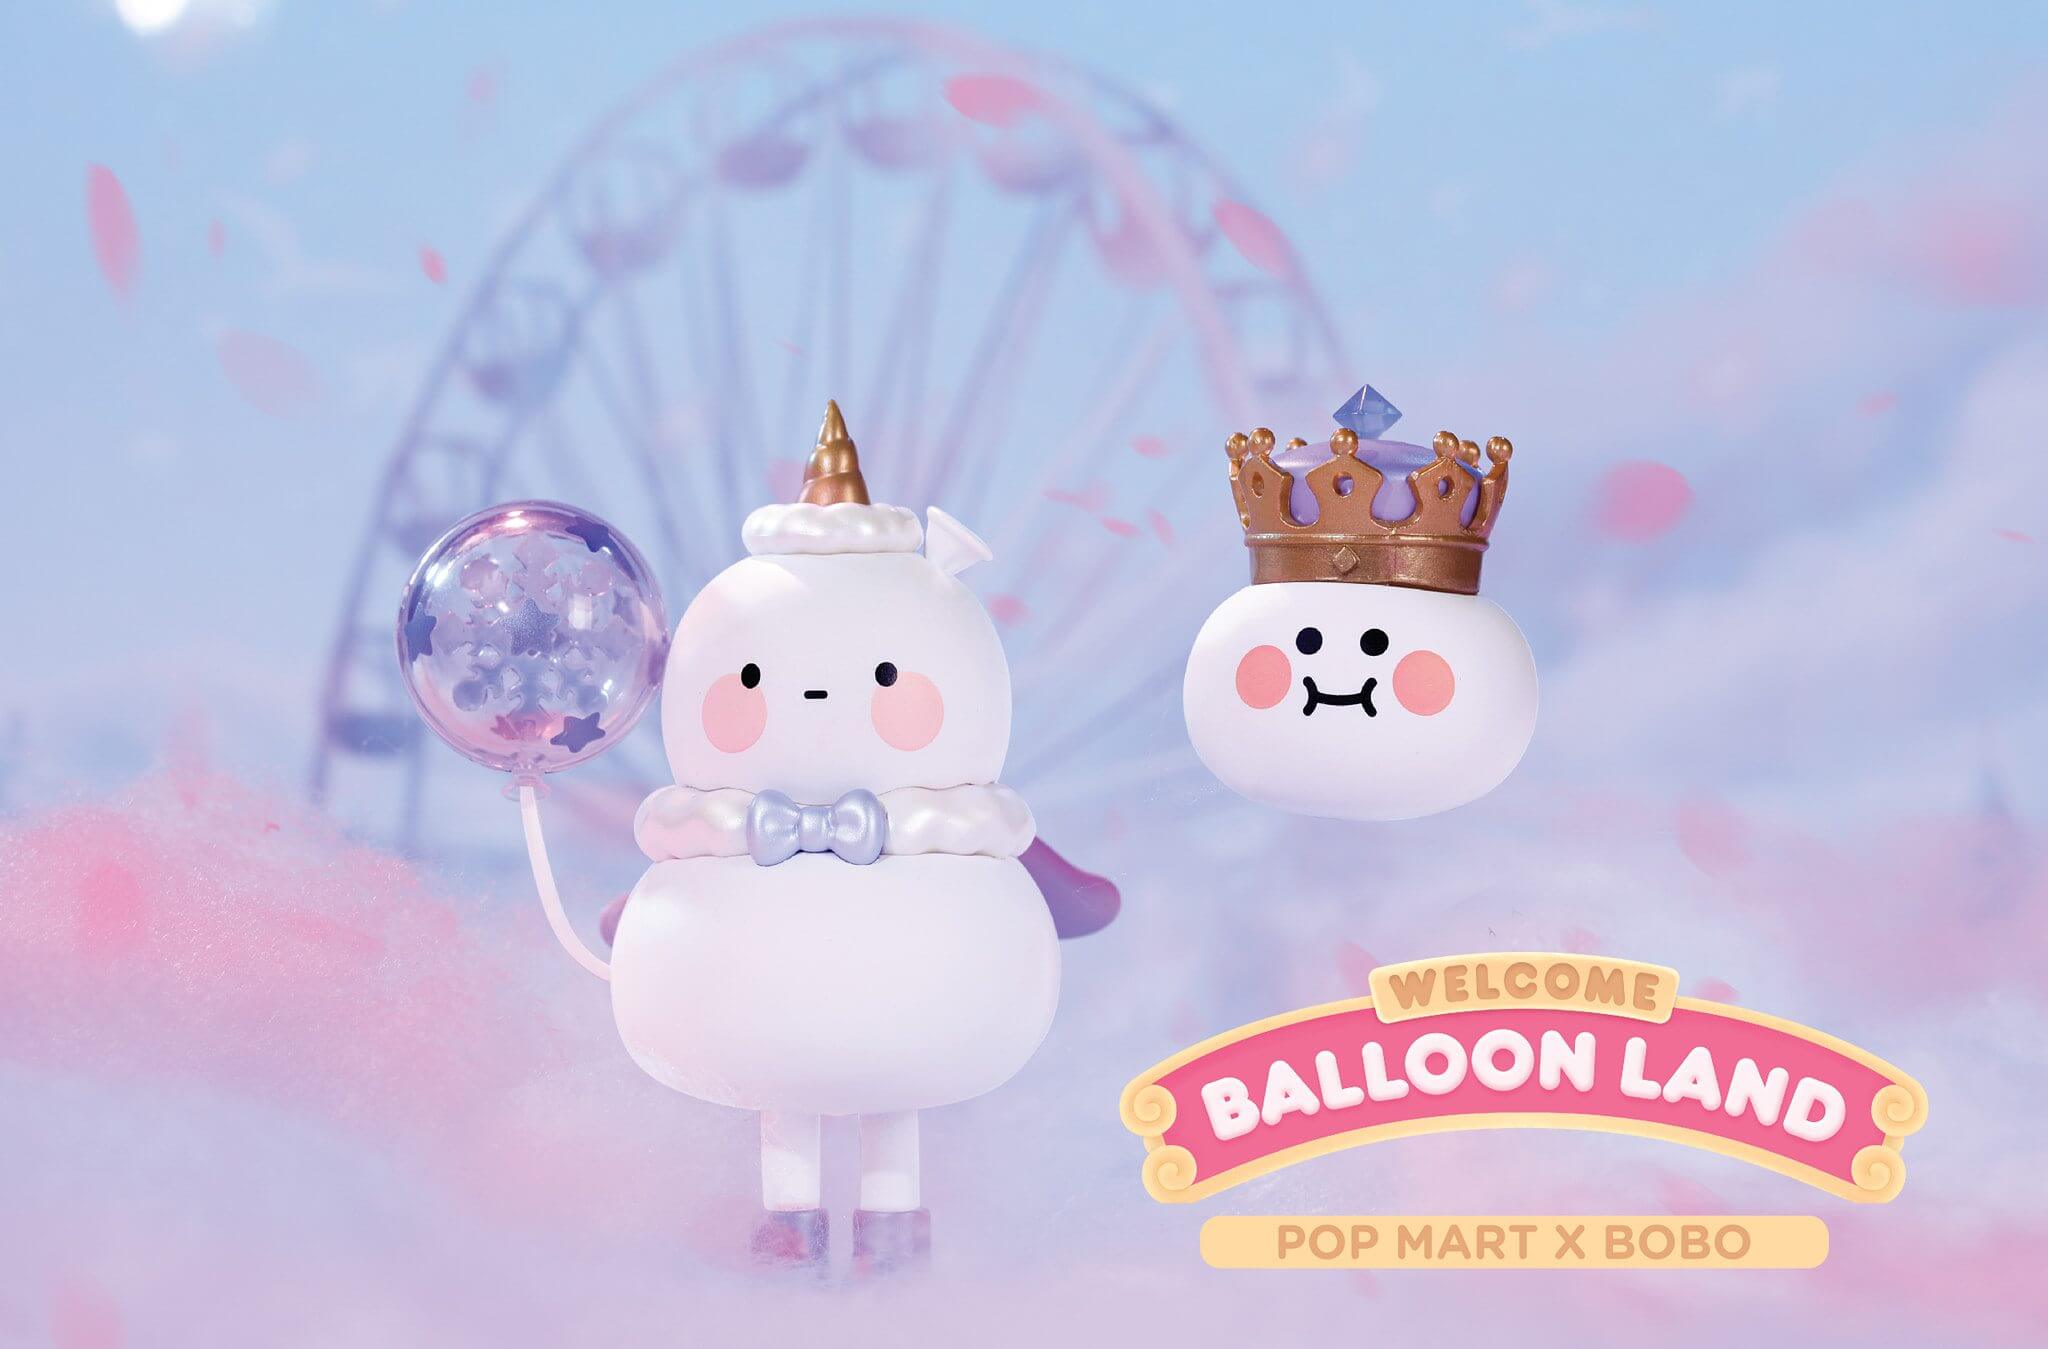 Details about   NeW Pop Mart x BOBO and COCO Balloon Land BLUEBERRY PENGUIN Vinyl Mini RaRe 